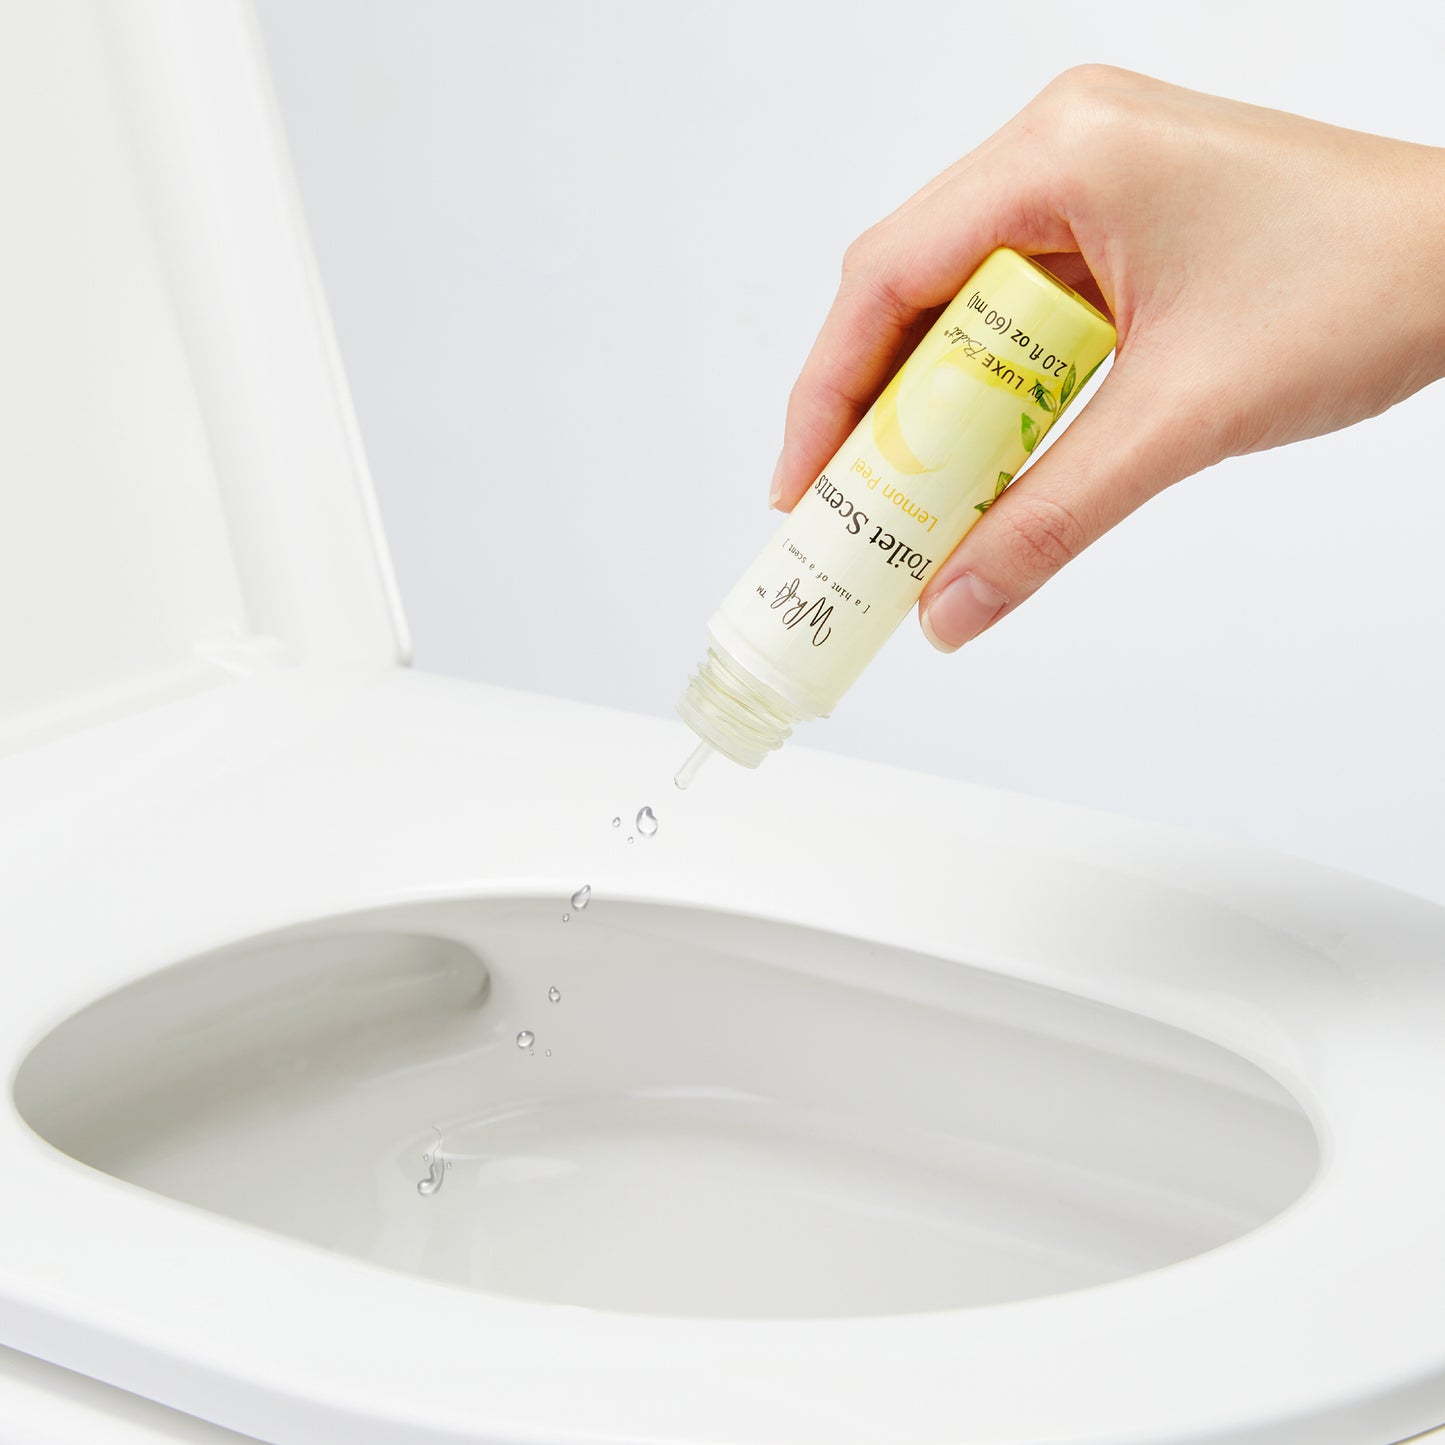 Hand squeezing drops of Lemon Peel Whift Drops into the toilet